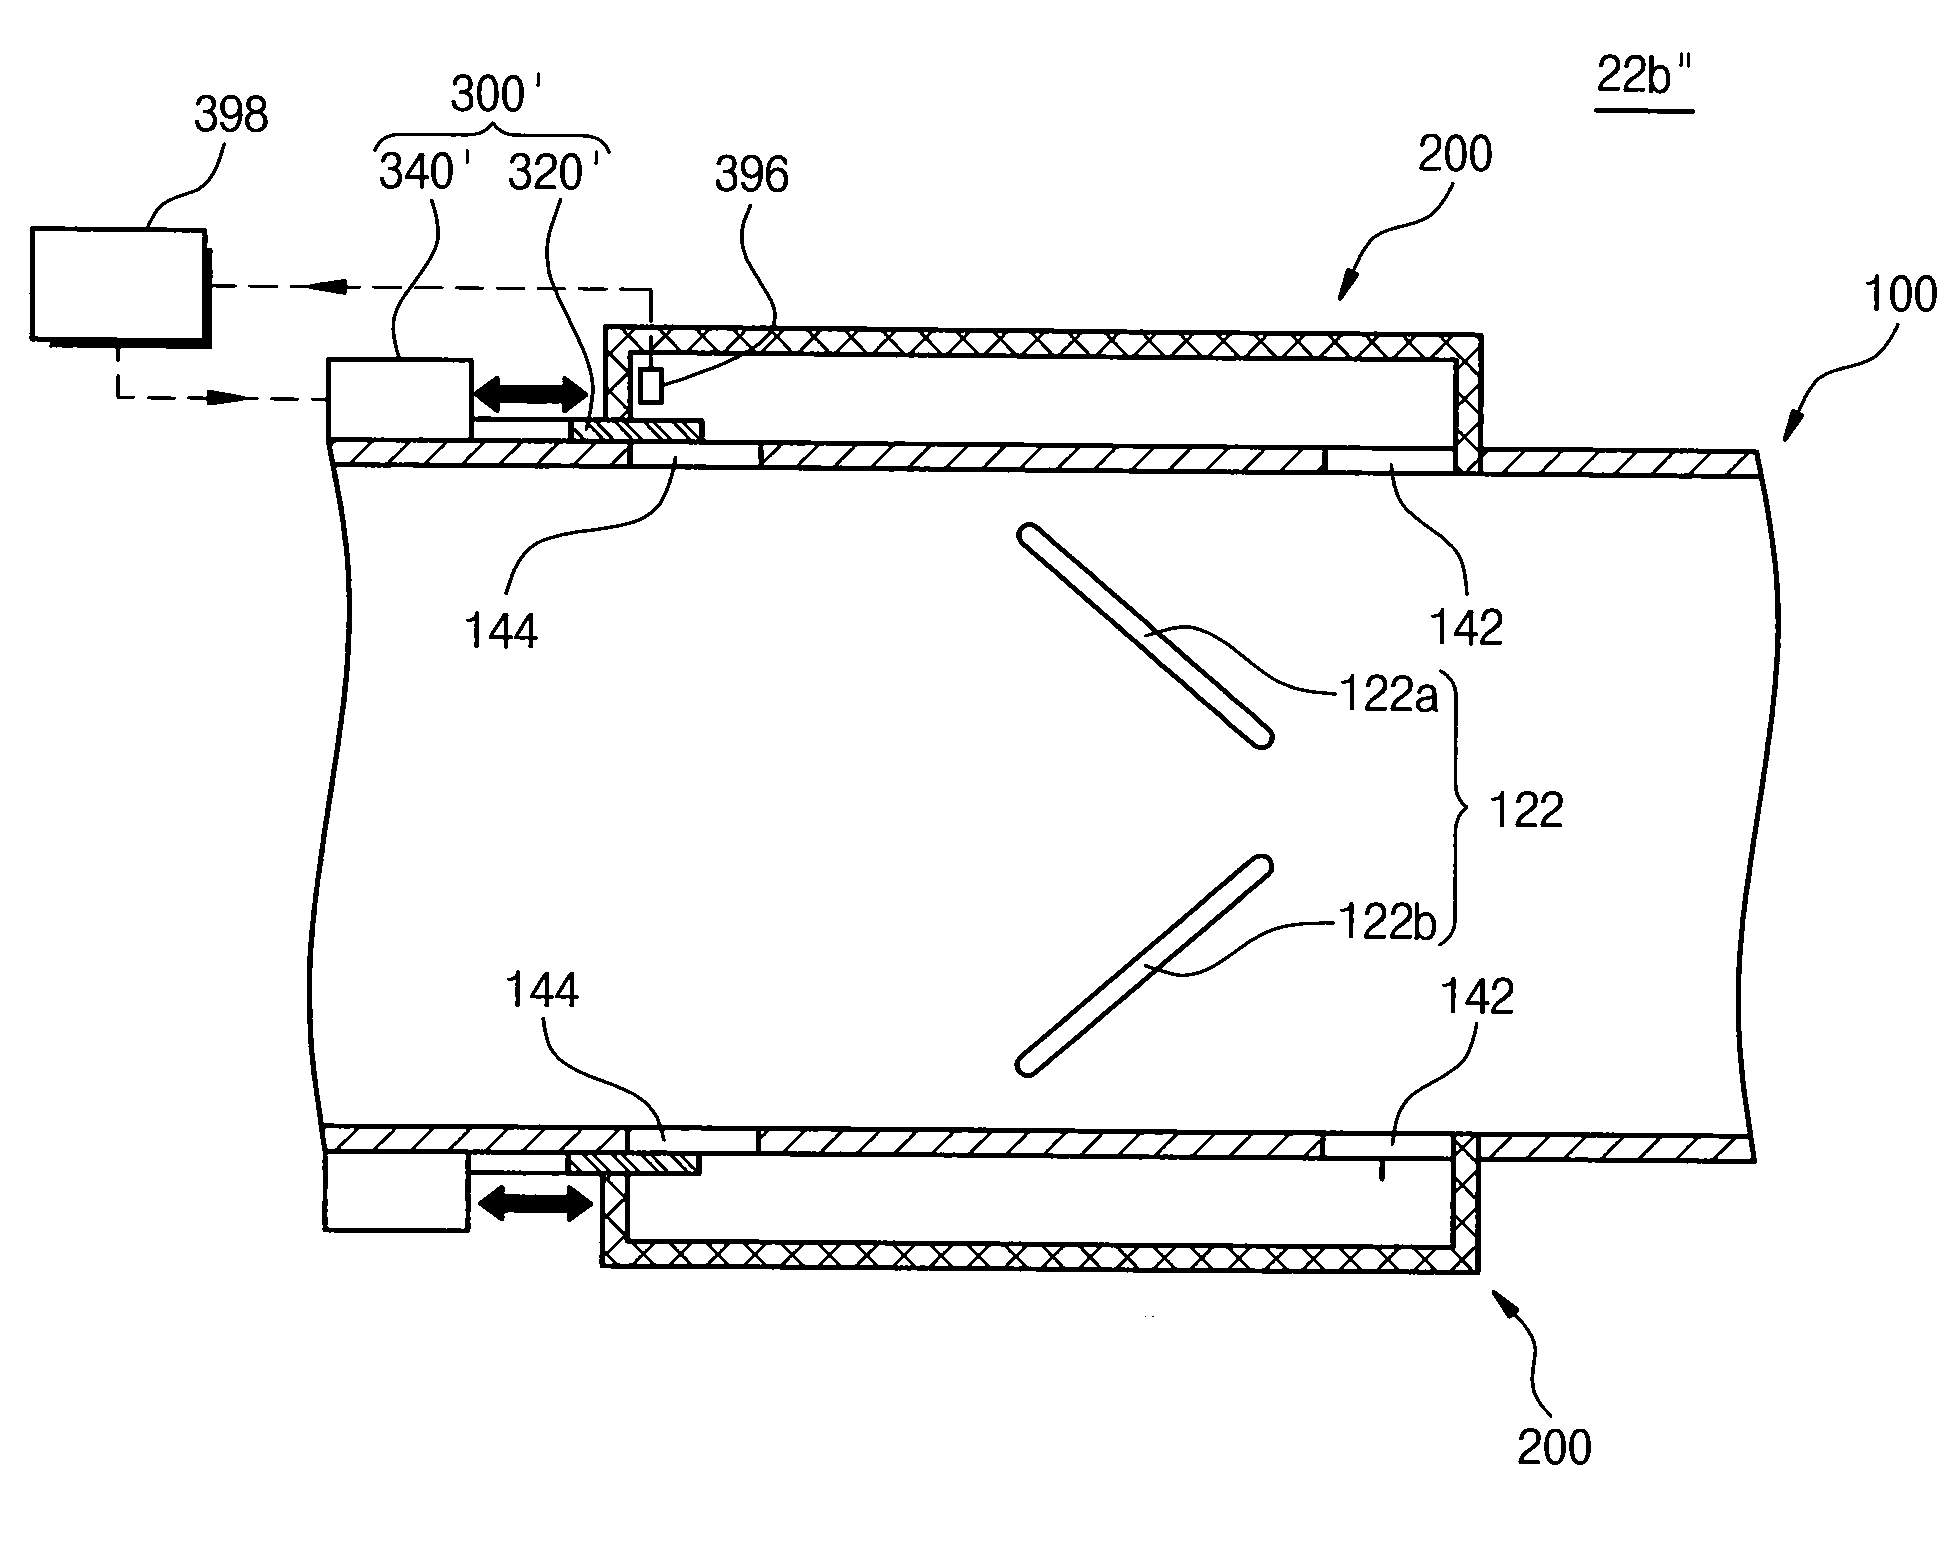 Exhaust unit, exhausting method, and semiconductor manufacturing facility with the exhaust unit